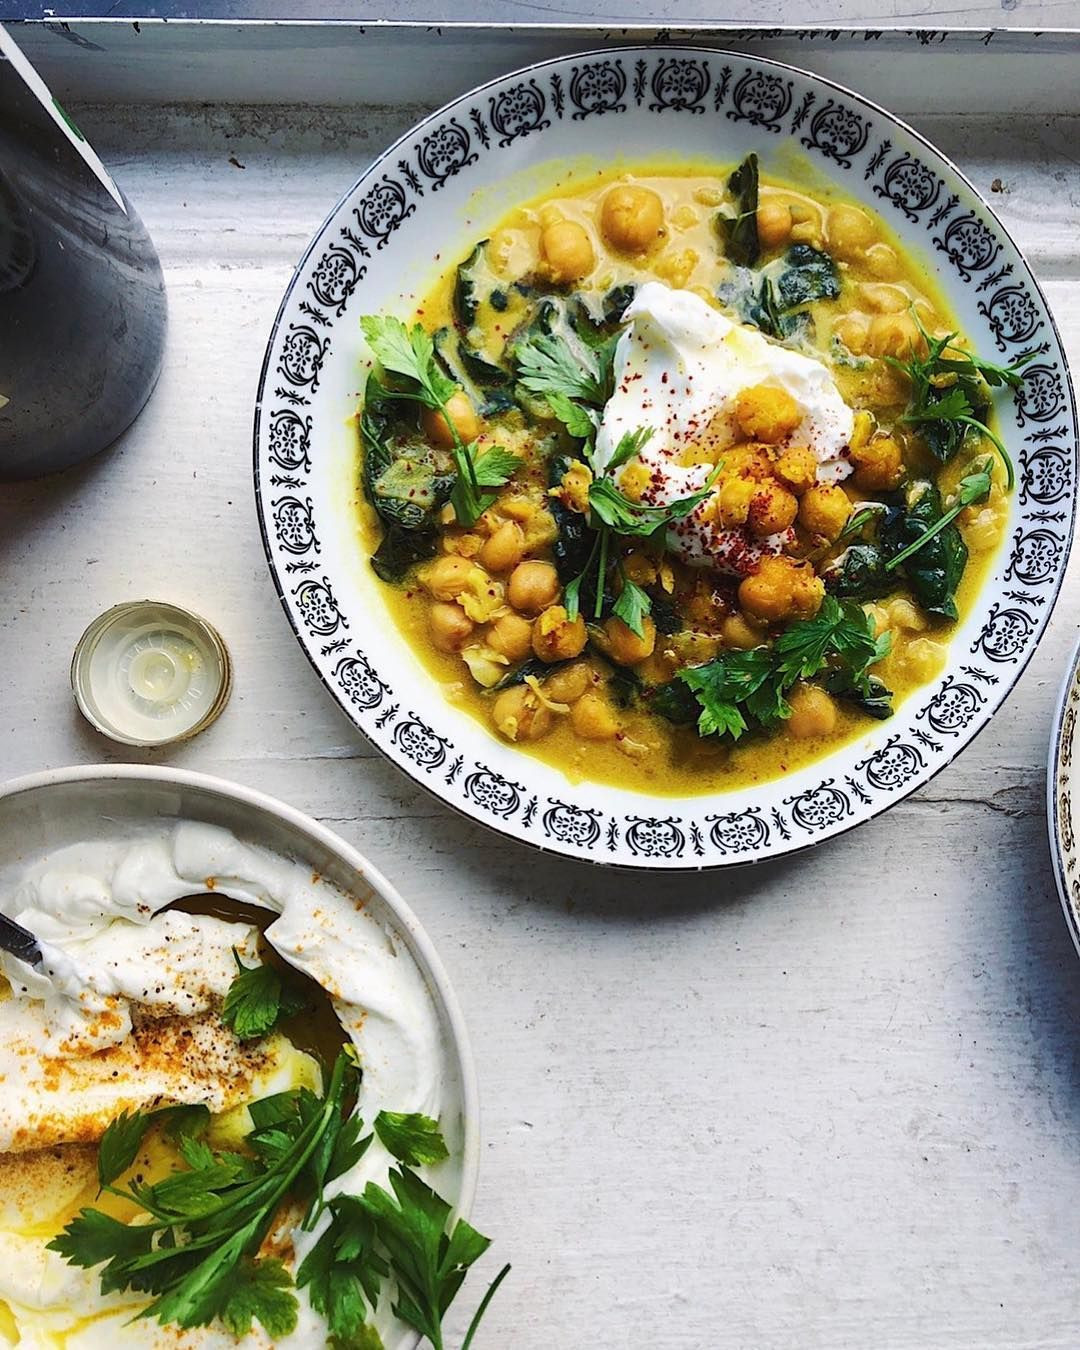 Spiced Chickpea Stew With Coconut And Turmeric
 “𝗧𝗛𝗘 𝗦𝗧𝗘𝗪”